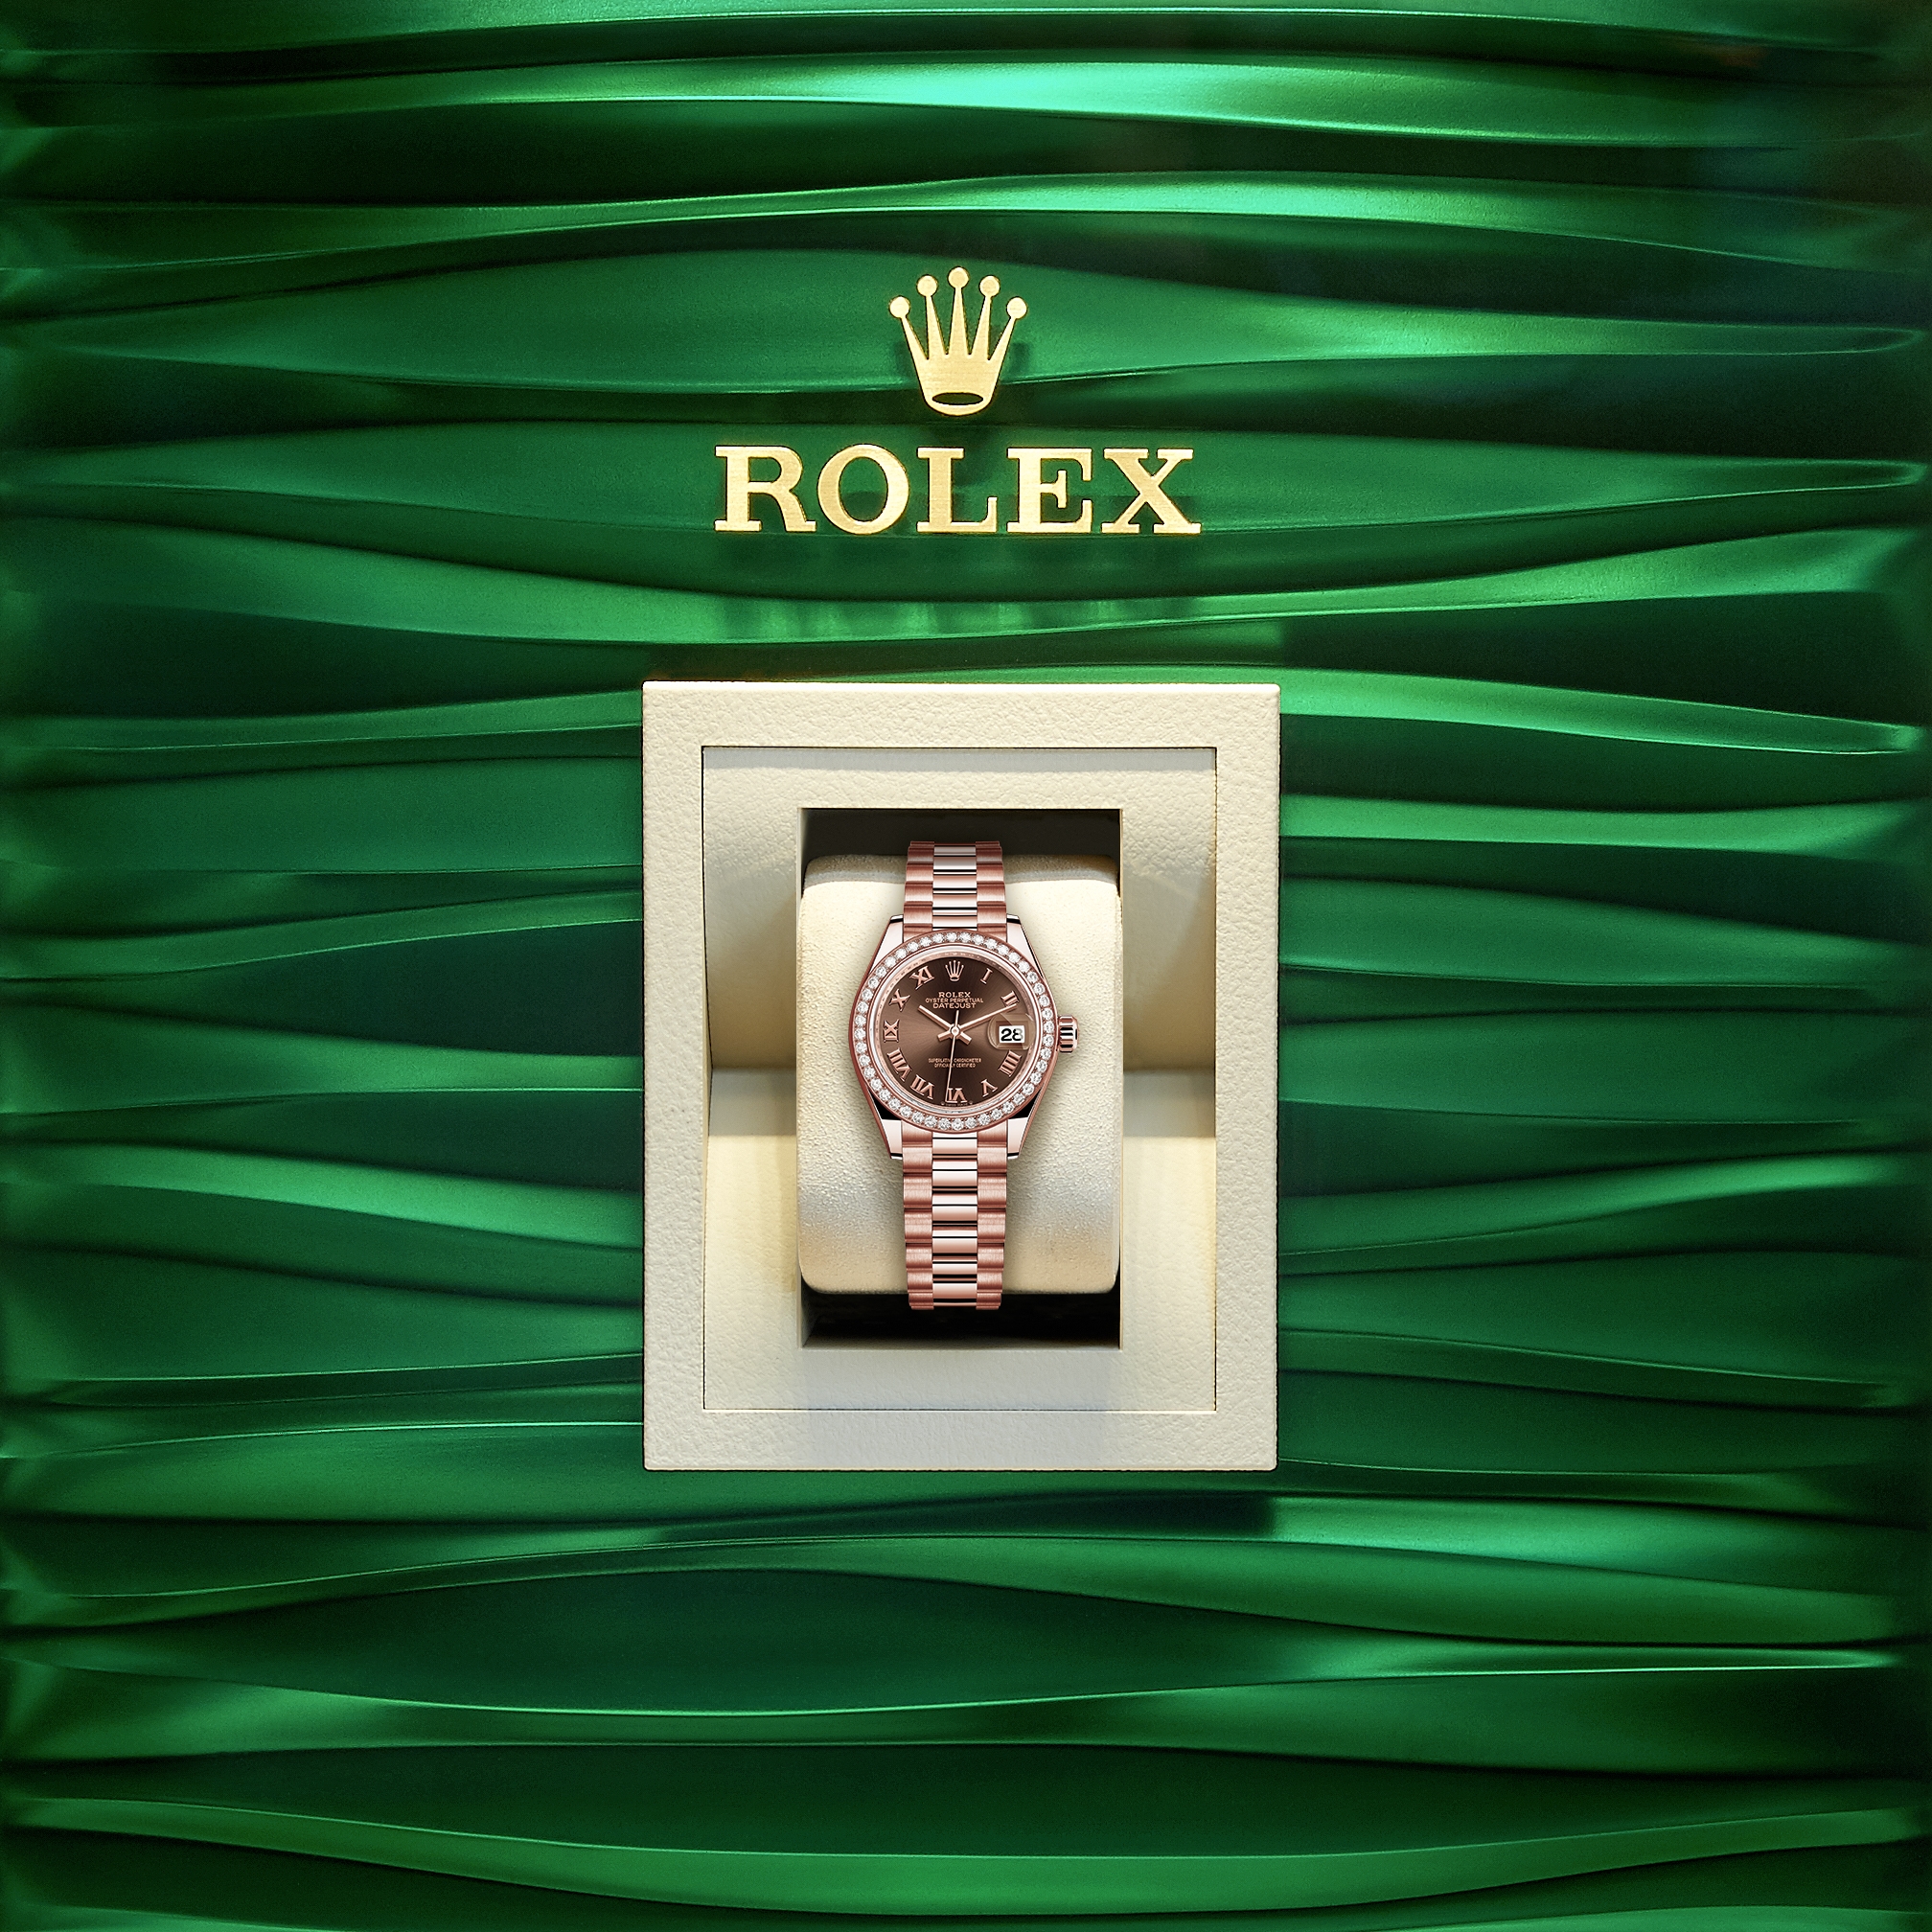 Rolex Men's Rolex 36mm Datejust Two Tone Vintage Fluted Bezel With Lugs White MOP Mother Of Pearl with 8 + 2 AccentRolex Men's Rolex 36mm Datejust Two Tone Vintage Fluted Bezel With Lugs White MOP Mother of Pearl Dial with Accen